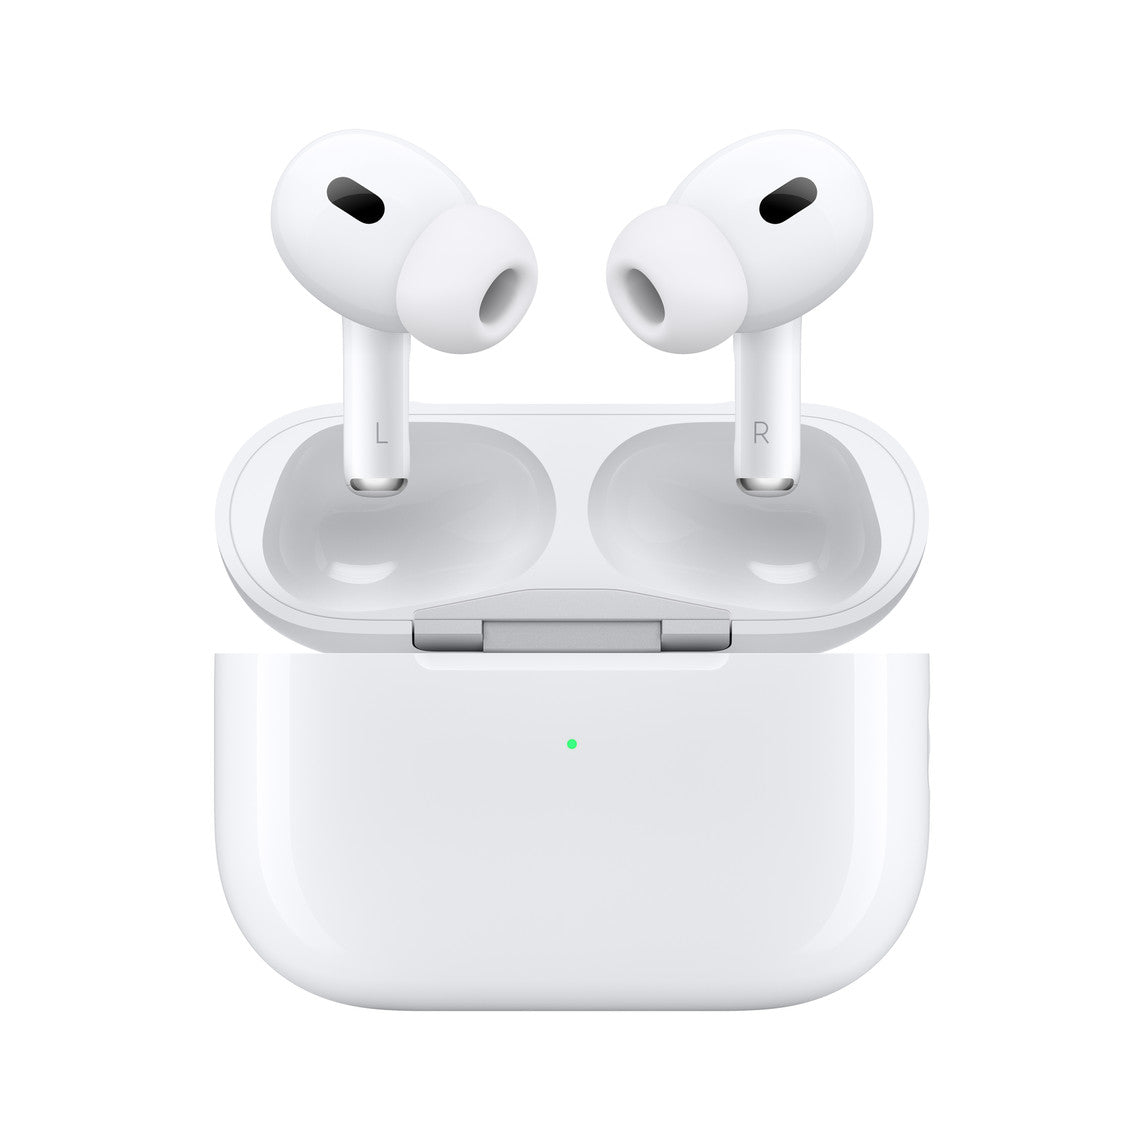 Airpods Pro - Copy - Warranty 3 months